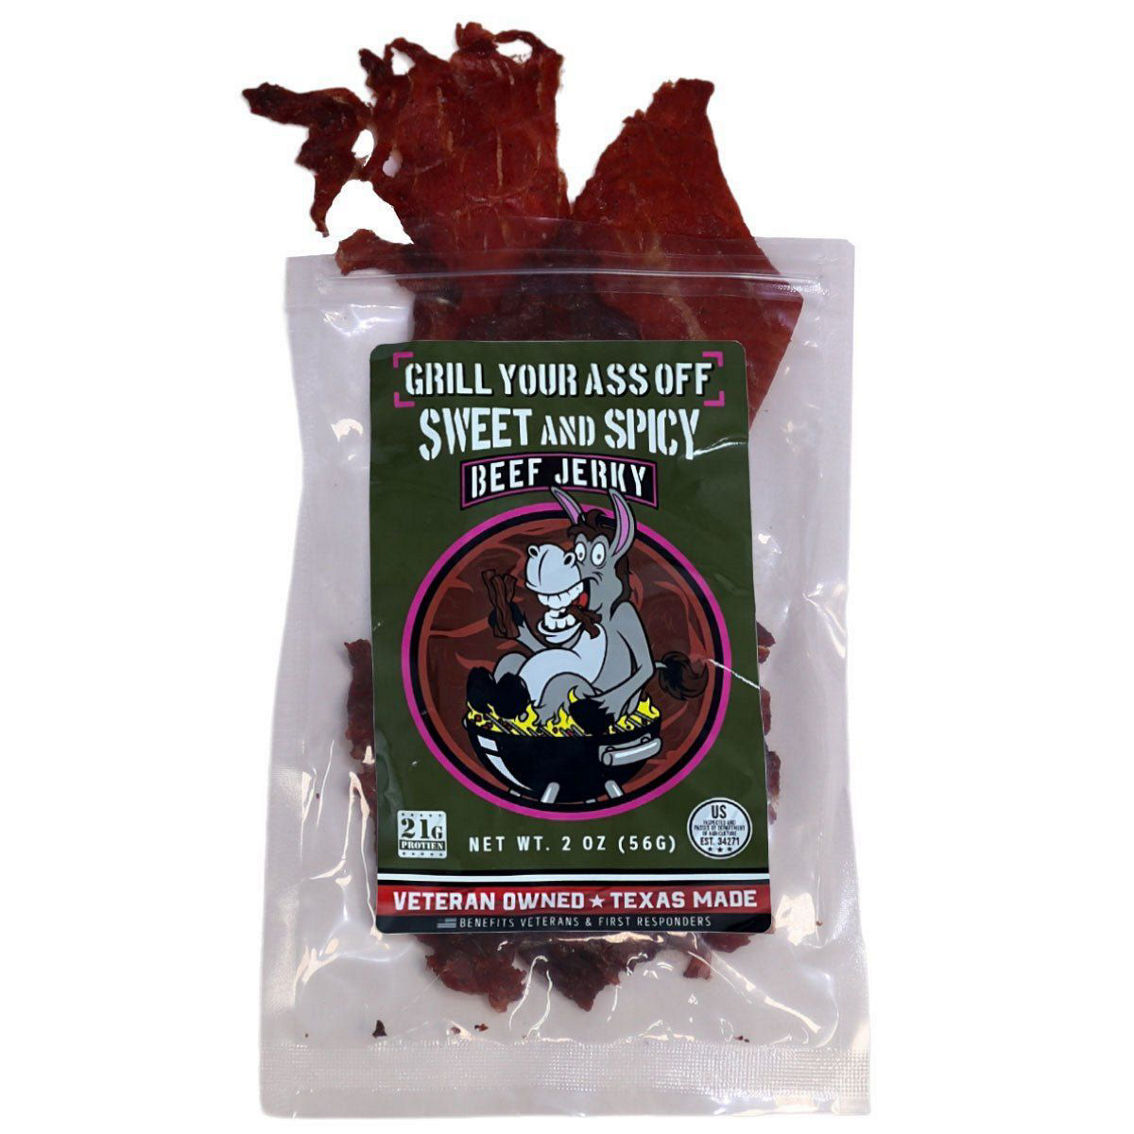 Grill Your A** Off Sweet & Spicy Beef Jerky